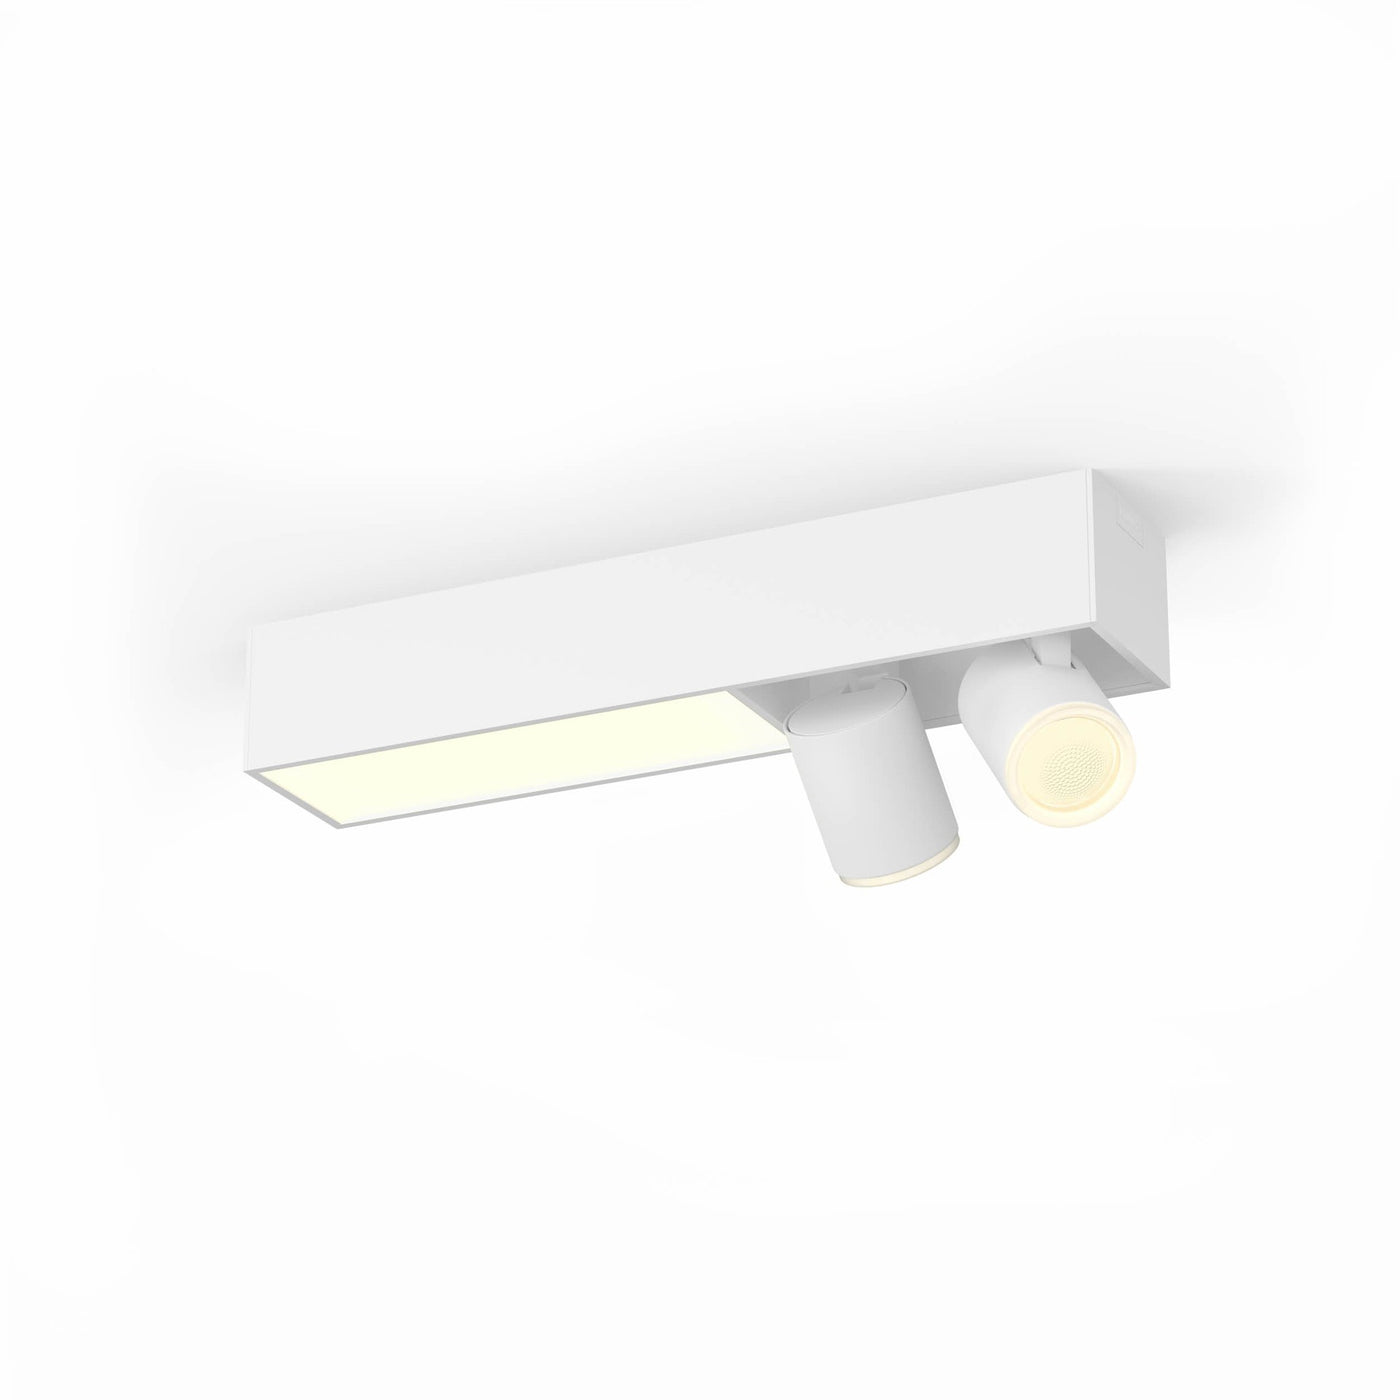 Hue Centris 2 Ceiling Lamp W&Color Ambiance-White